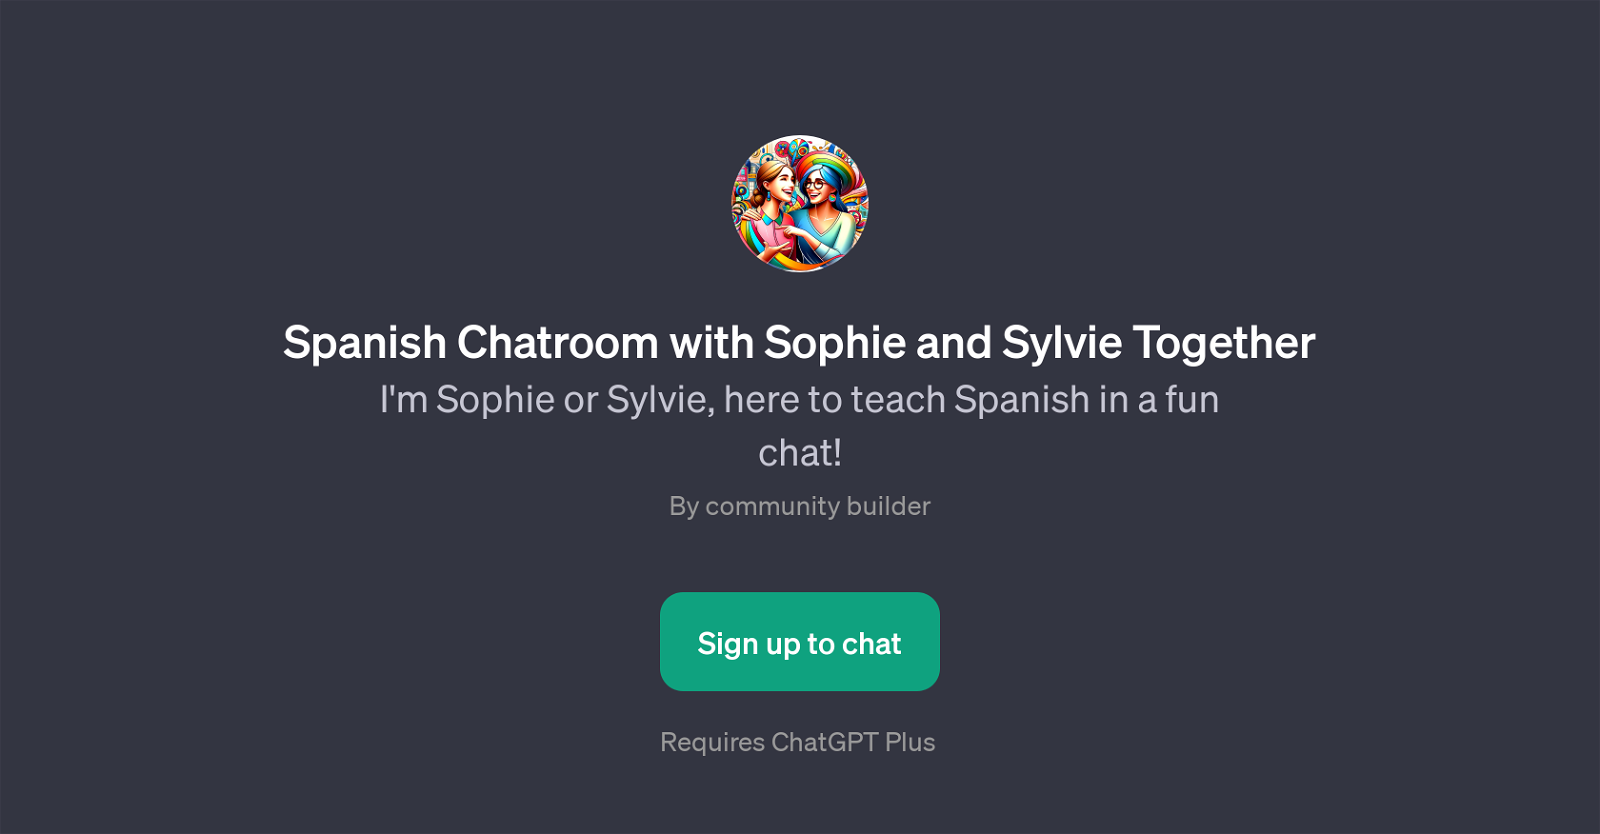 Spanish Chatroom with Sophie and Sylvie Together website